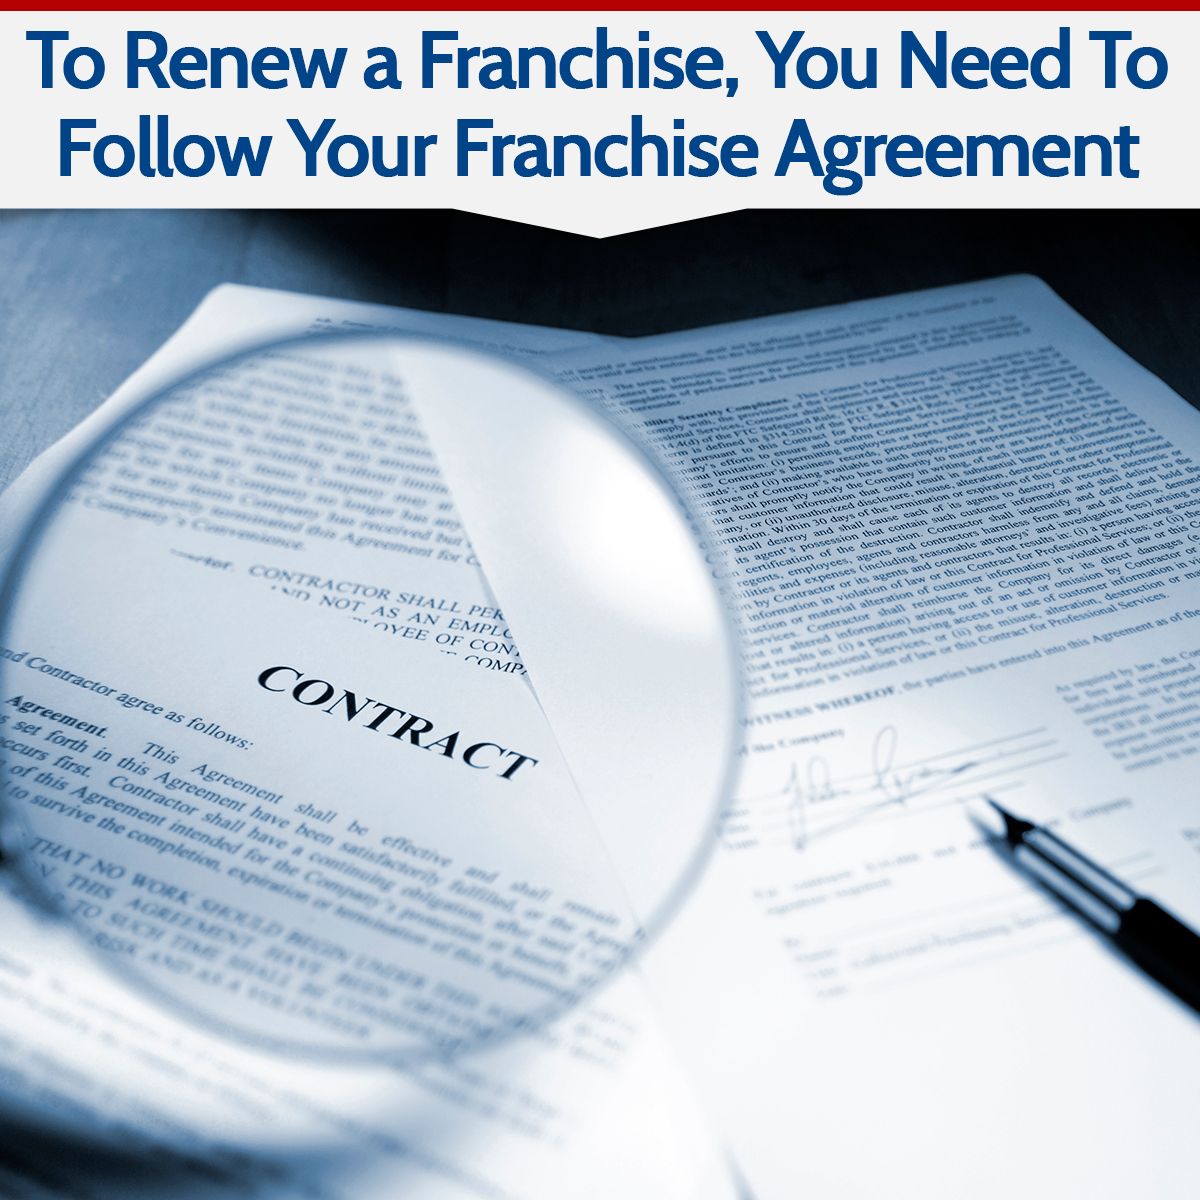 To Renew a Franchise, You Need To Follow Your Franchise Agreement